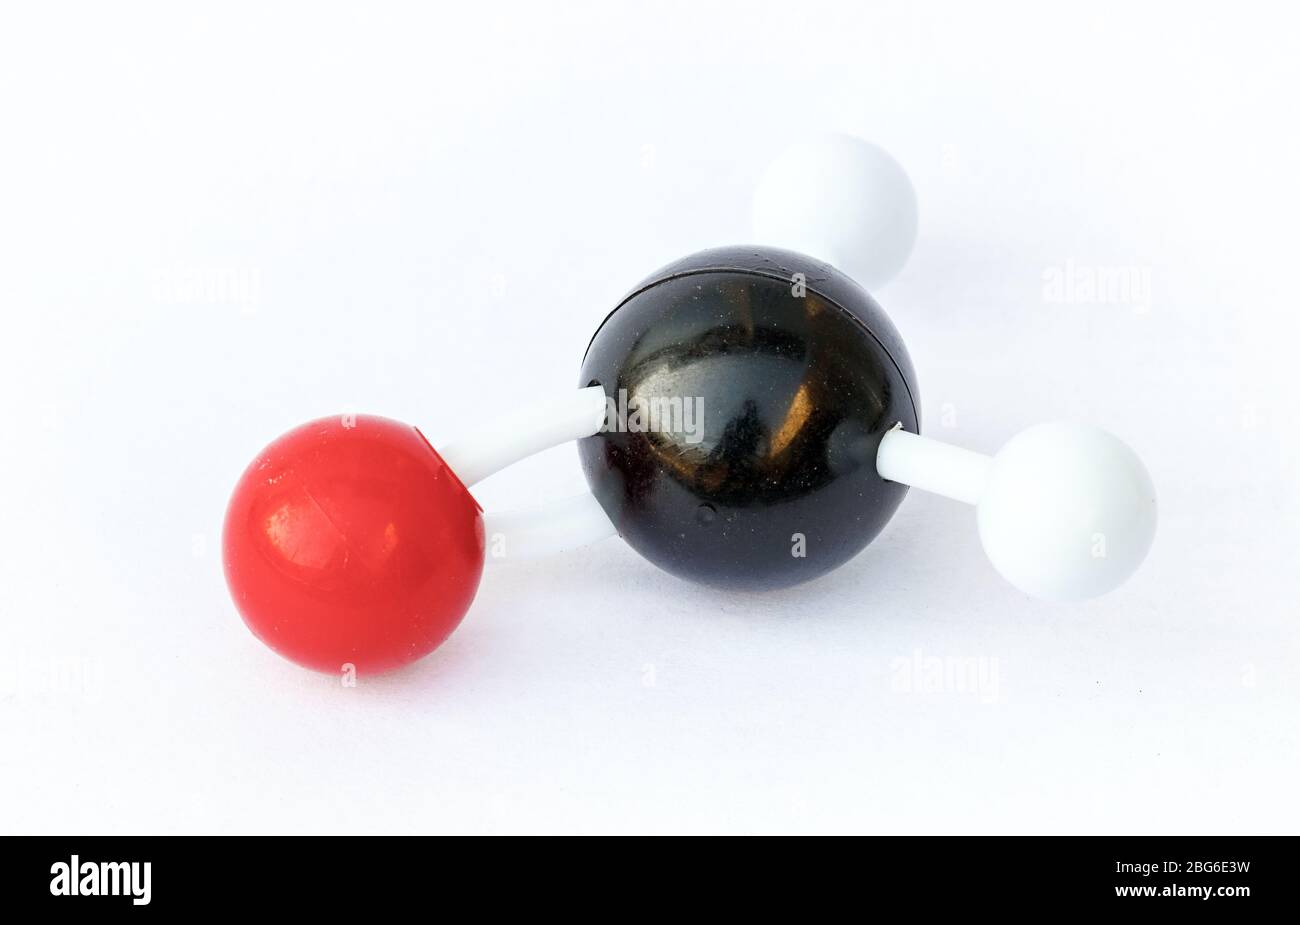 Plastic ball-and-stick model of a formaldehyde (chemical formula CH2O) molecule on a white background. Stock Photo